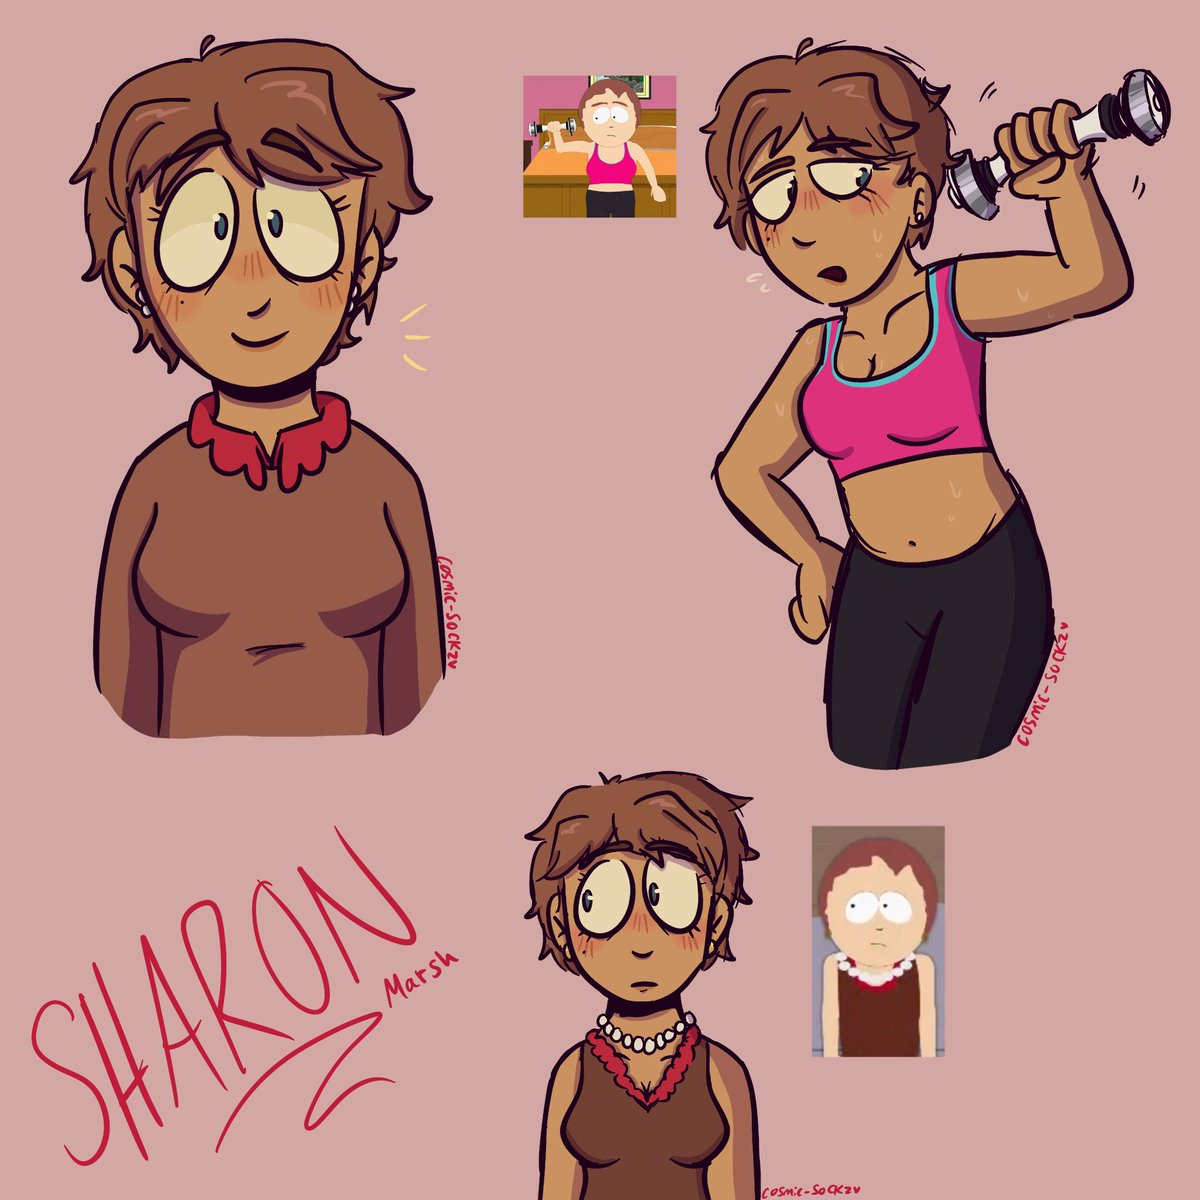 Sharon won the hottest mom out of the main 4 poll so I drew her!! 😉

[ #SouthPark #spsharon #sptwt ]